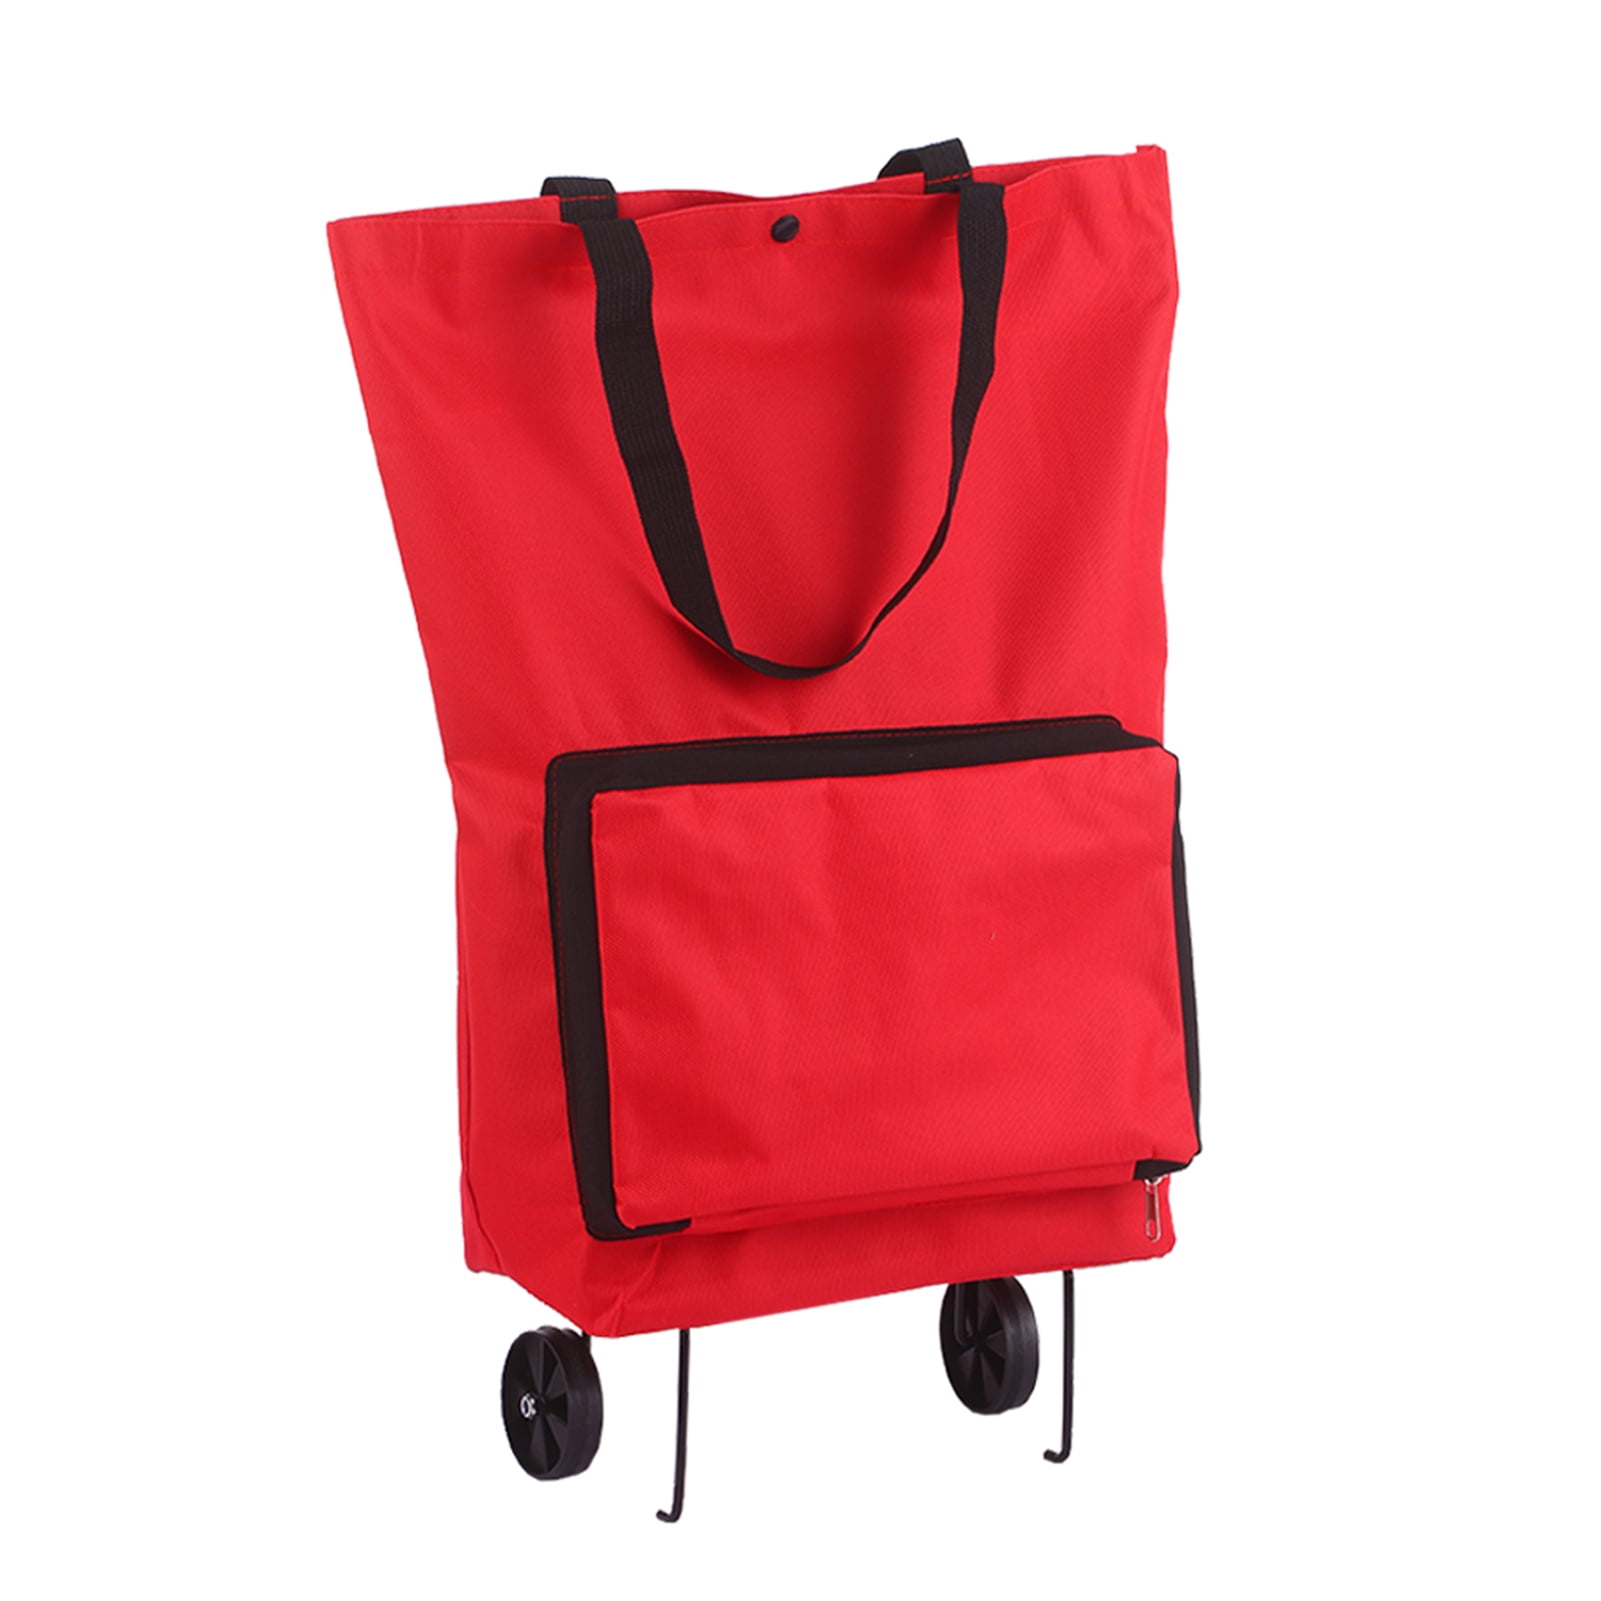 Details about   Foldable Shopping Storage Bags Portable Trolley Bag Food Grocery Cart On Wheels 